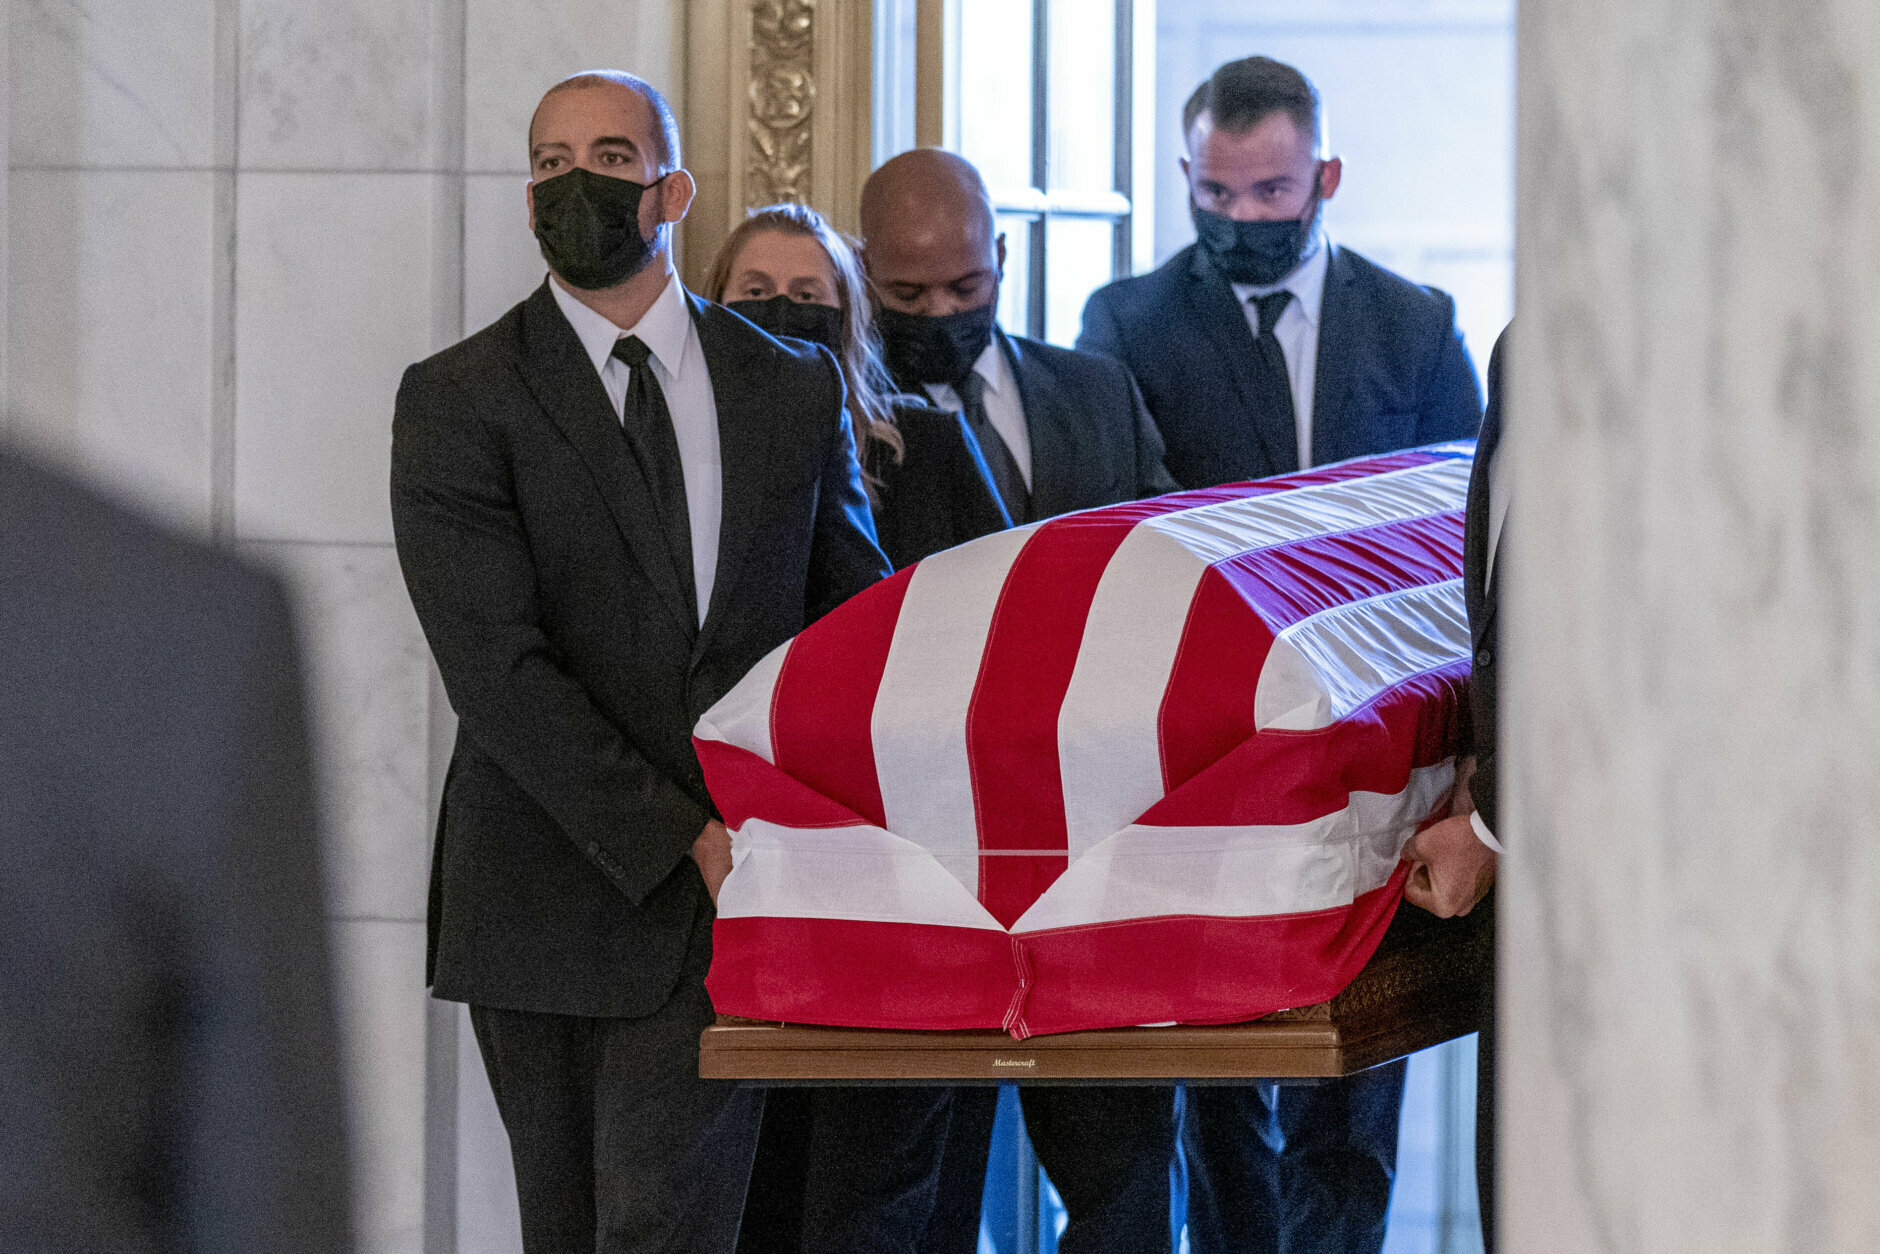 The flag-draped casket of Justice Ruth Bader Ginsburg arrives at the Supreme Court in Washington, Wednesday, Sept. 23, 2020. Ginsburg, 87, died of cancer on Sept. 18. (AP Photo/Andrew Harnik, Pool)